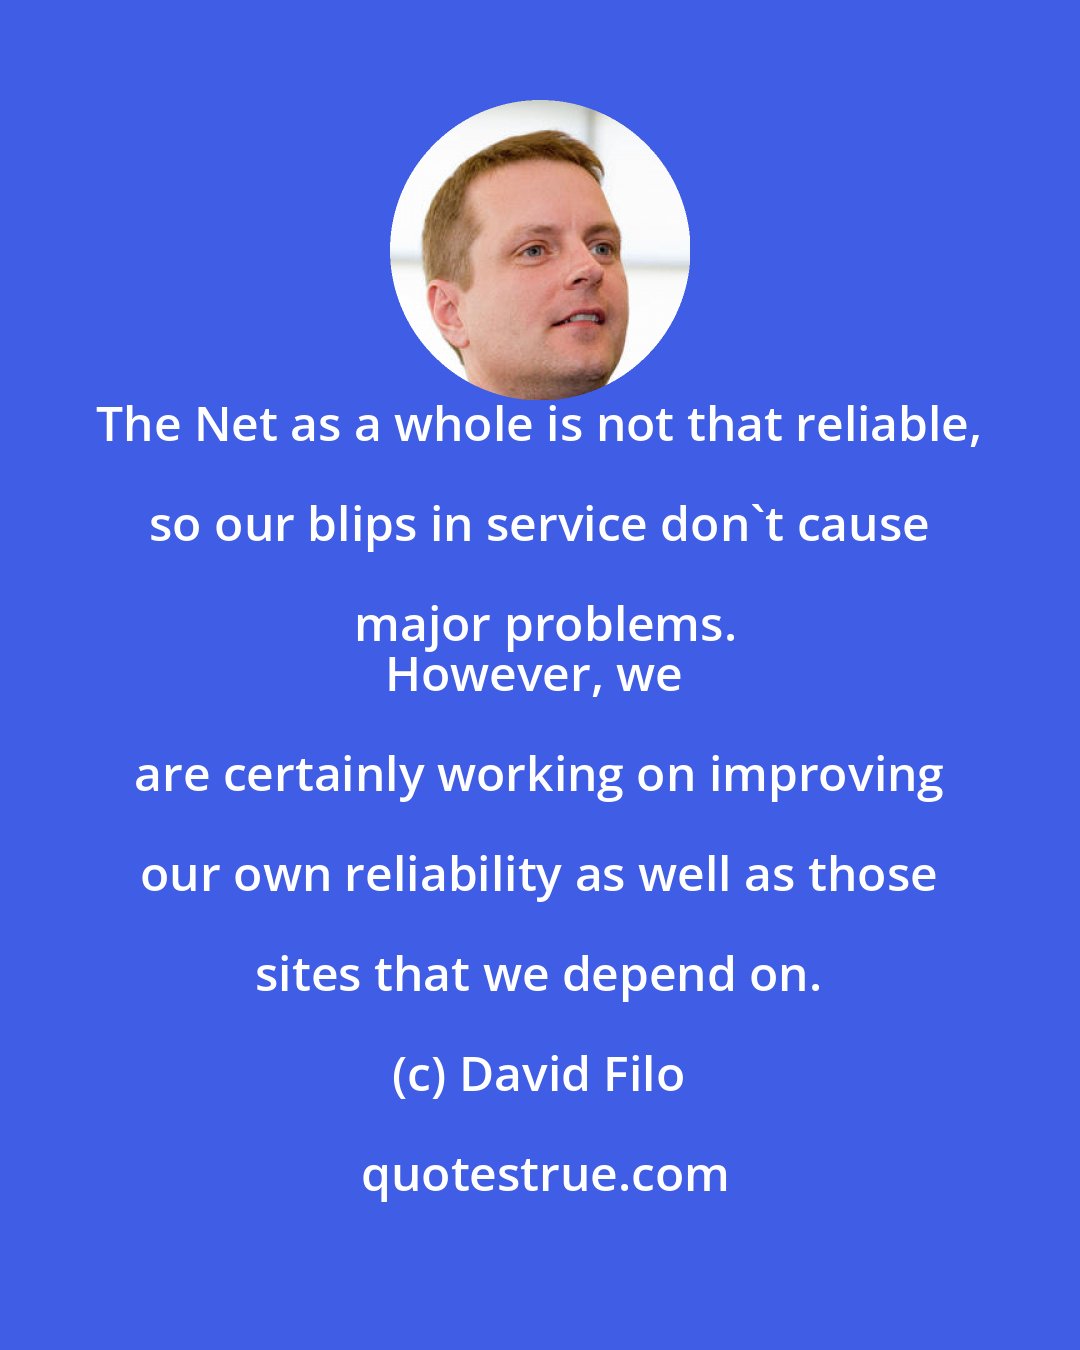 David Filo: The Net as a whole is not that reliable, so our blips in service don't cause major problems.
However, we are certainly working on improving our own reliability as well as those sites that we depend on.